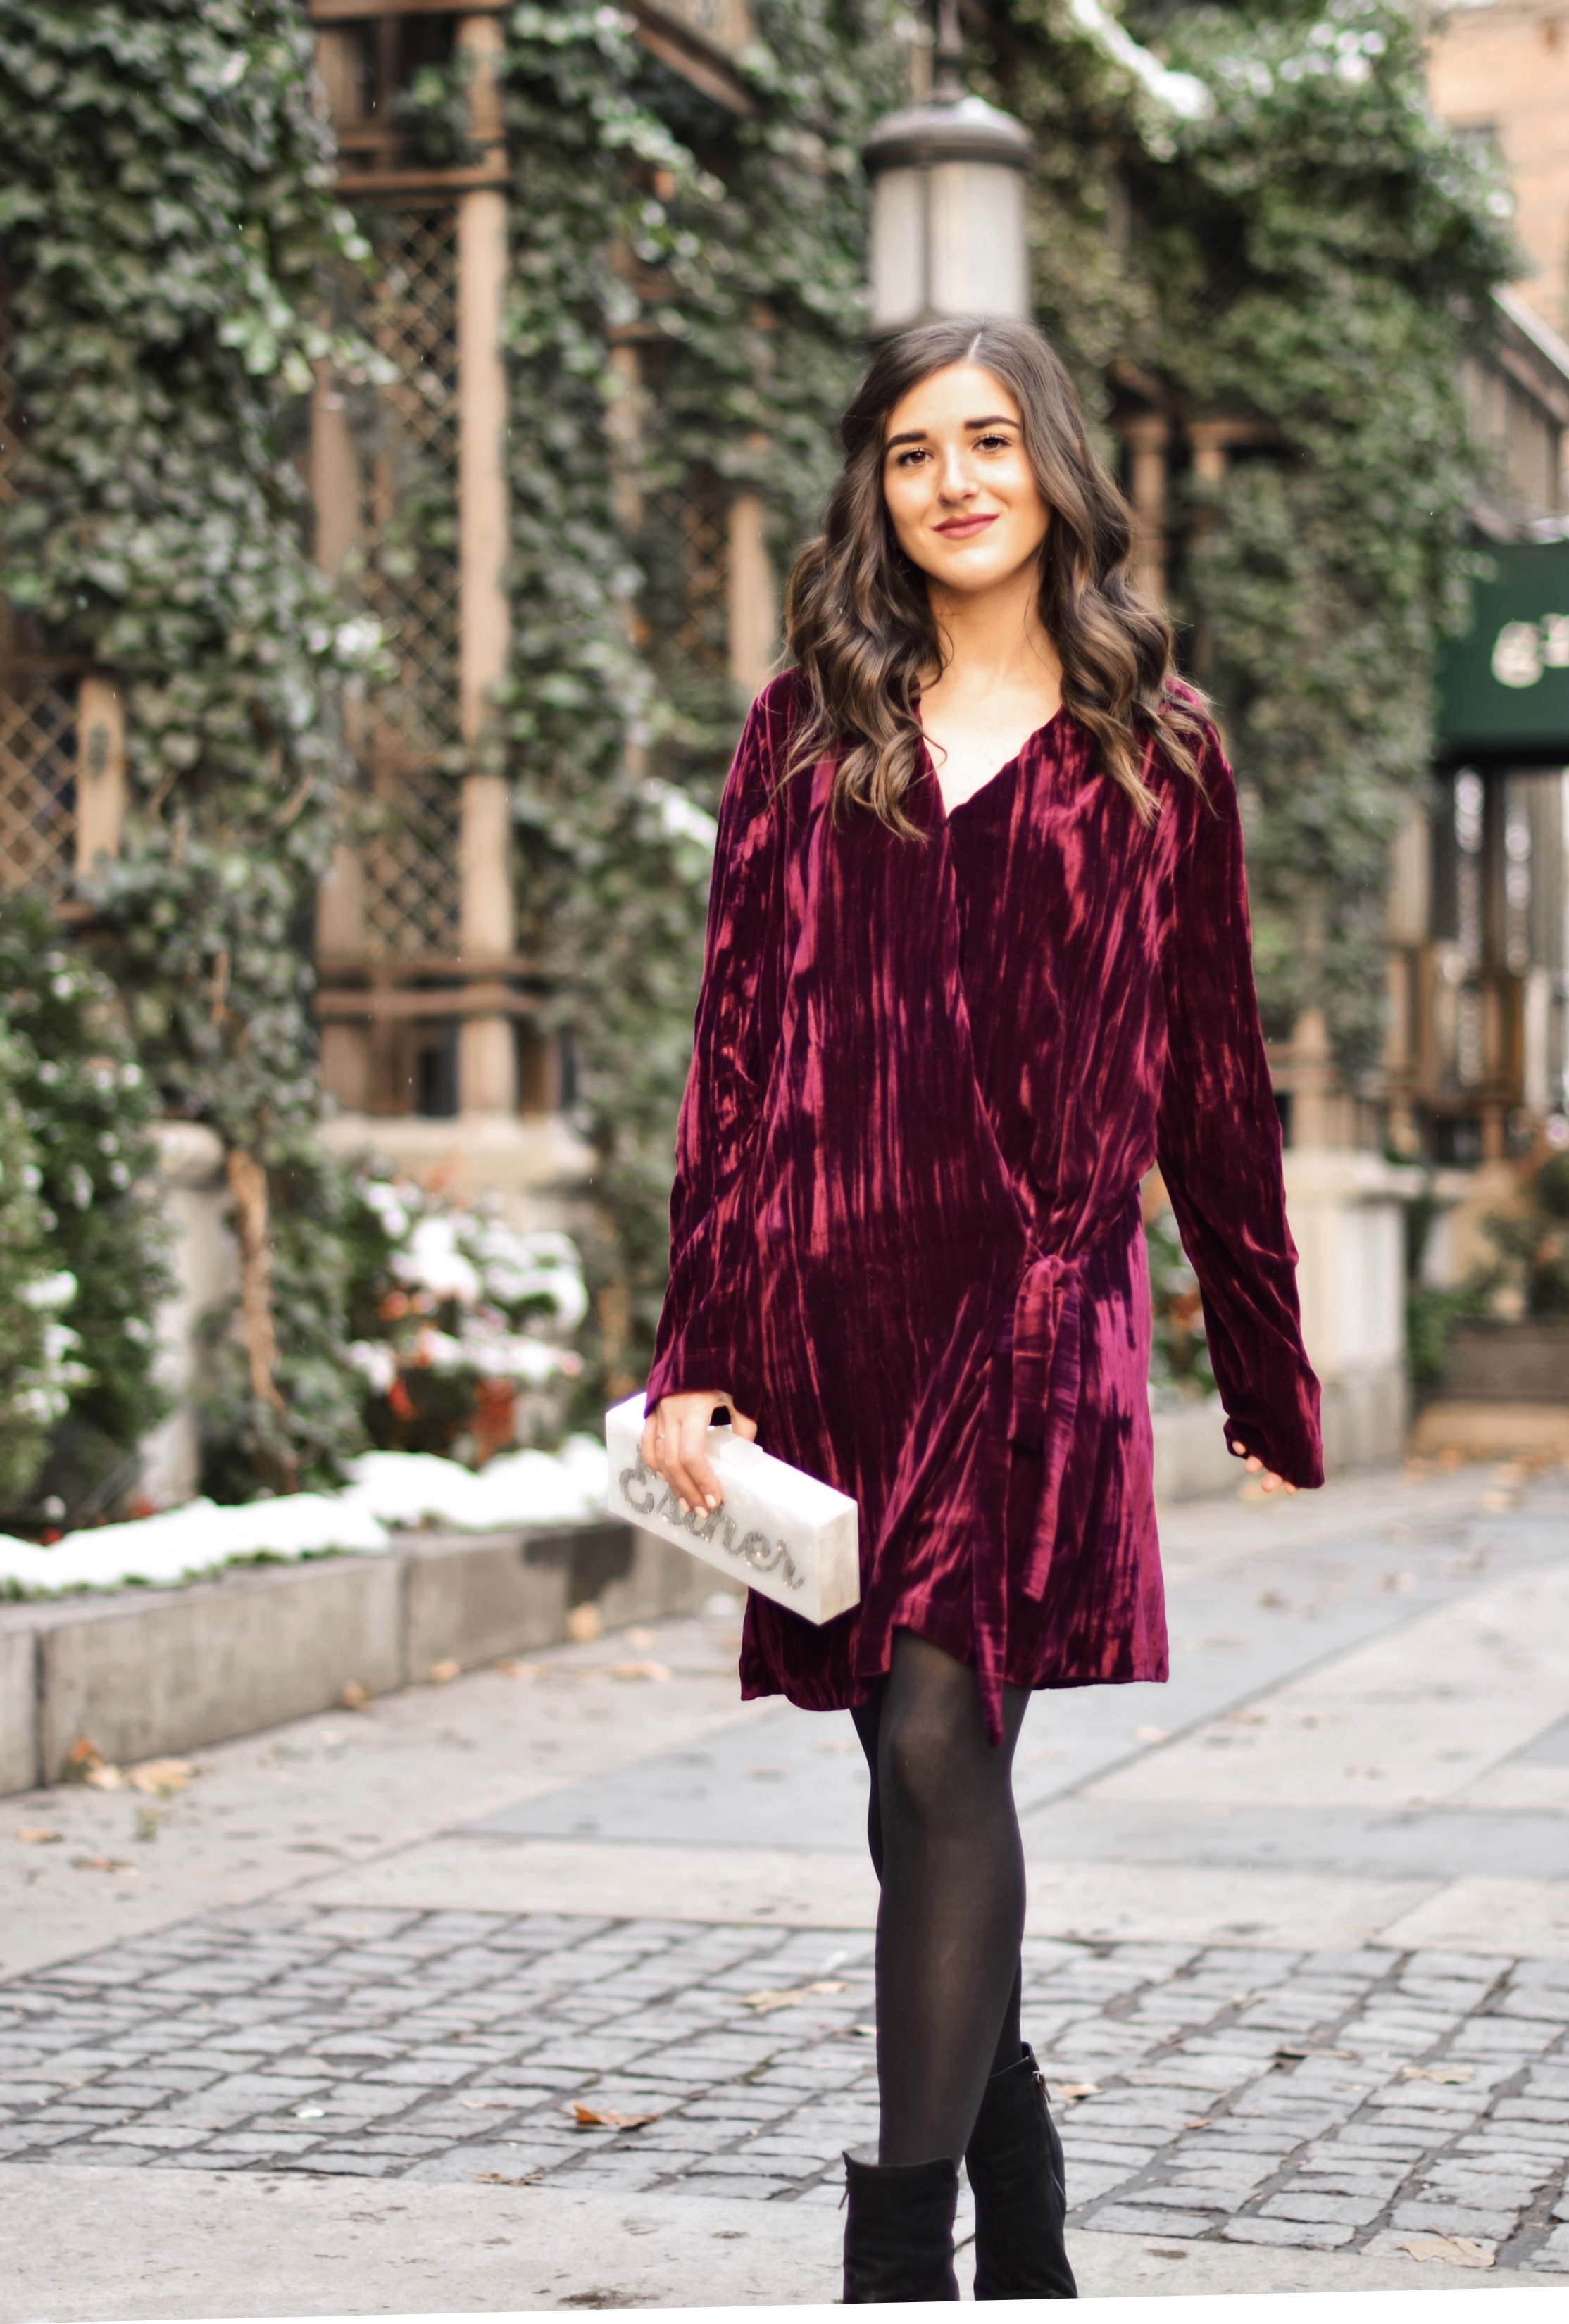 17 Tips On Building An Instagram Following Maroon Velvet Dress Black Booties Esther Santer Fashion Blog NYC Street Style Blogger Outfit OOTD Trendy Zara Online Shopping Winter Monogram Box Bag Clutch Shoes M4D3 Hue Tights Wear Wavy Hair Simple Classic.jpg